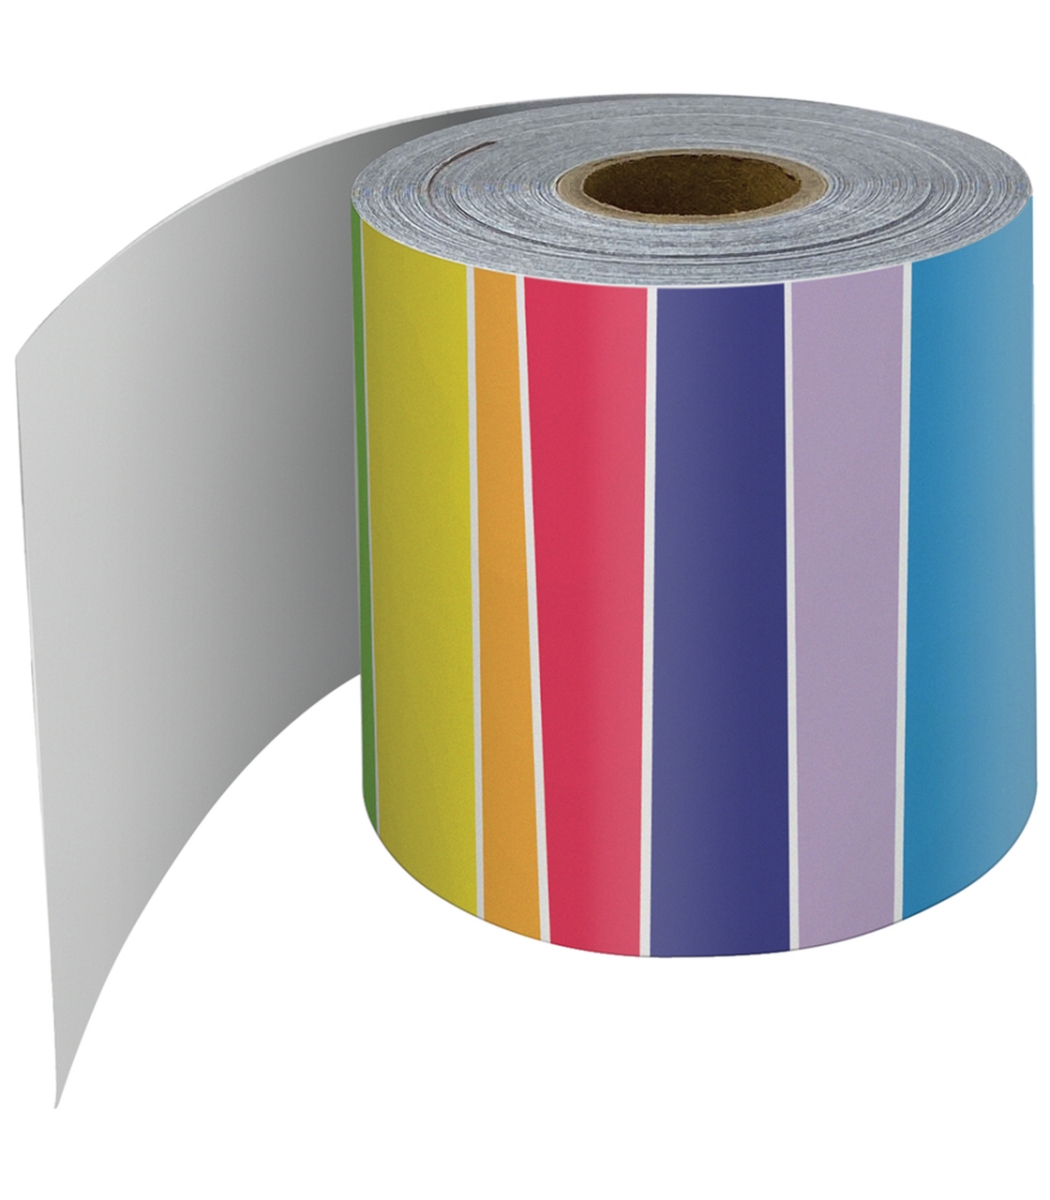 Picture of Carson Dellosa Education CD-108475-3 Rolled Straight Borders, Rainbow - 3 Roll